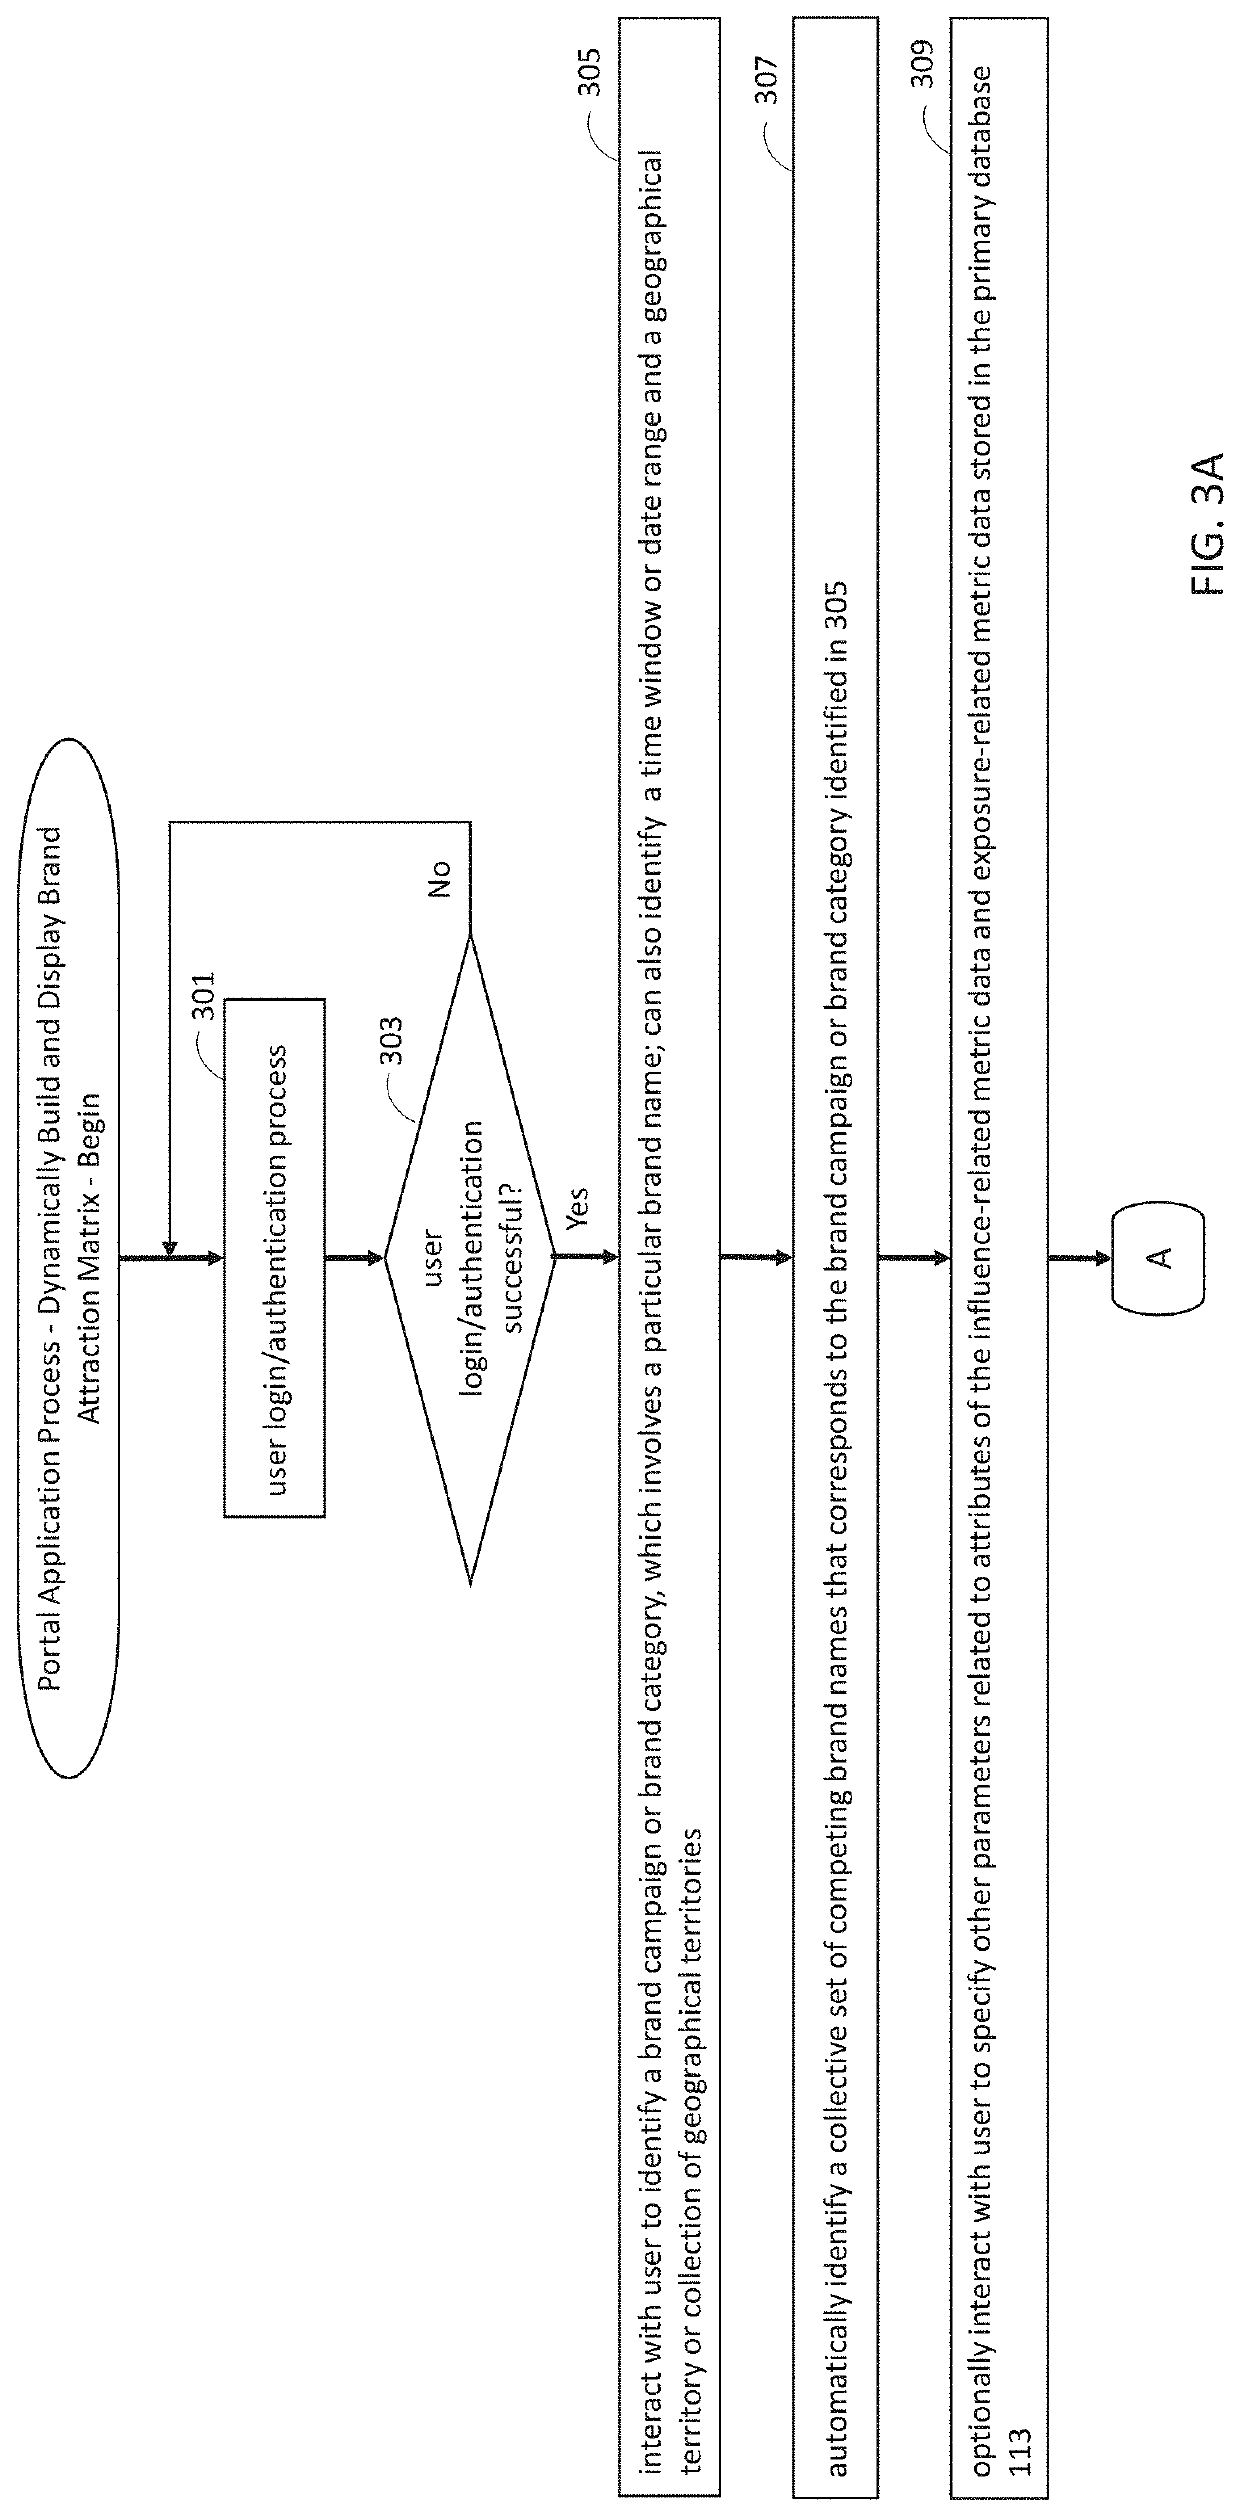 Methods and systems for monitoring brand performance based on combining disparate consumer behavior metric data and expenditure data related to a competitive brand set over time